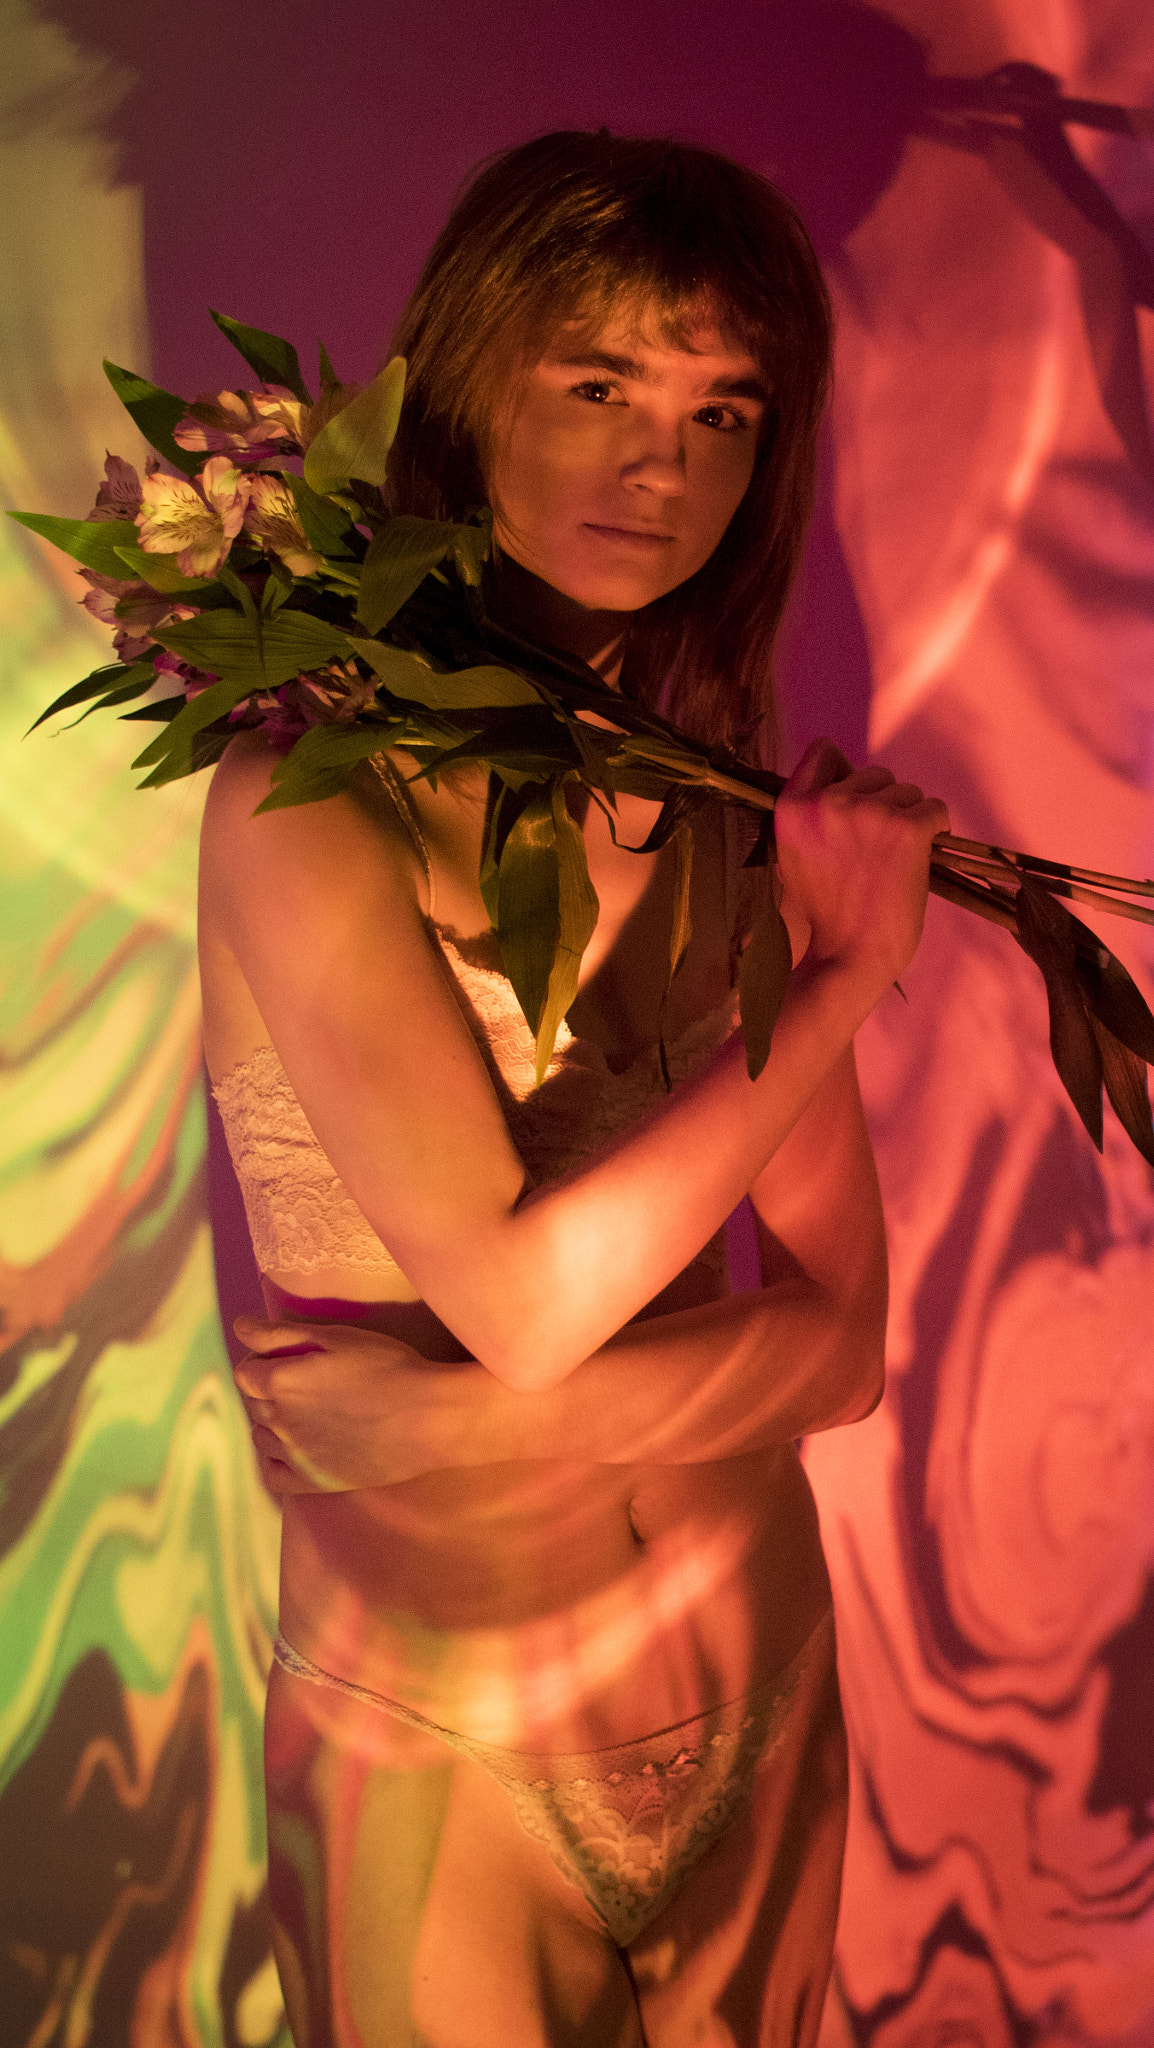 Sony a7R sample photo. Projecting the models paintings onto her while using colored light bulbs photography